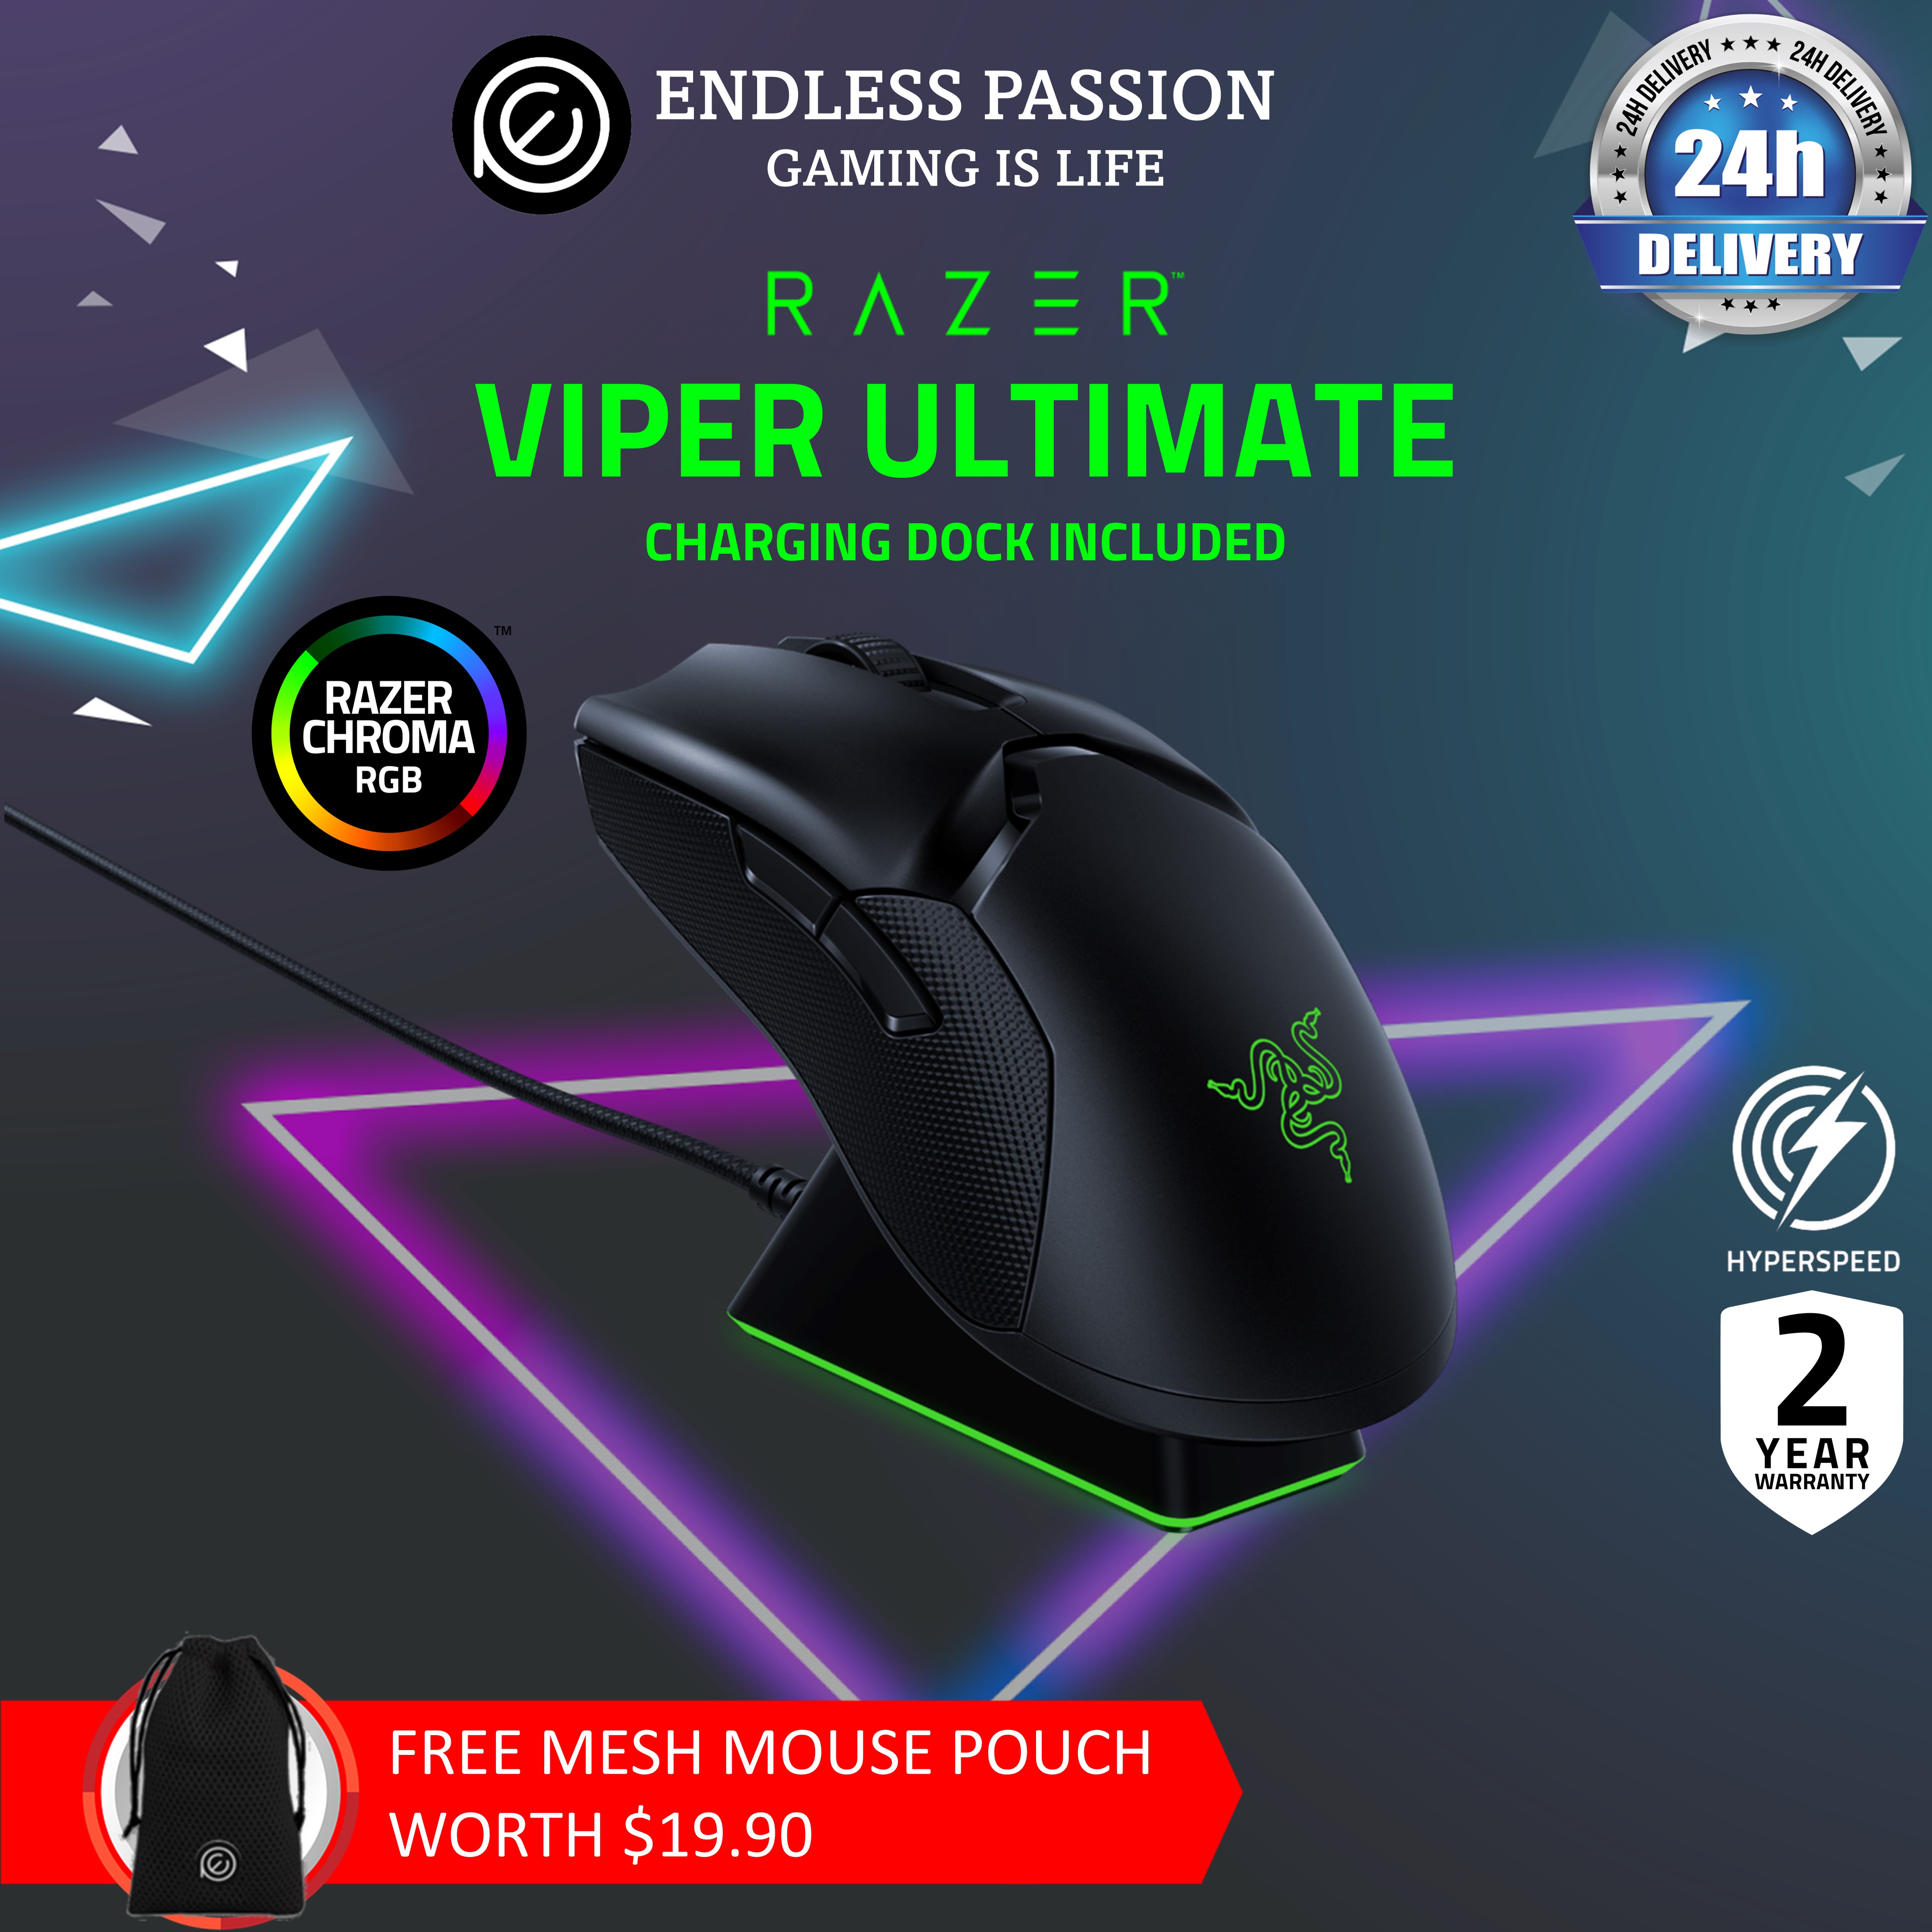 Razer Viper Ultimate Hyperspeed Ambidextrous Wireless Gaming Mouse Rgb Charging Dock Fastest Gaming Mouse Switch k Dpi Optical Sensor Chroma Lighting 8 Programmable Buttons 70 Hr Battery Lazada Singapore